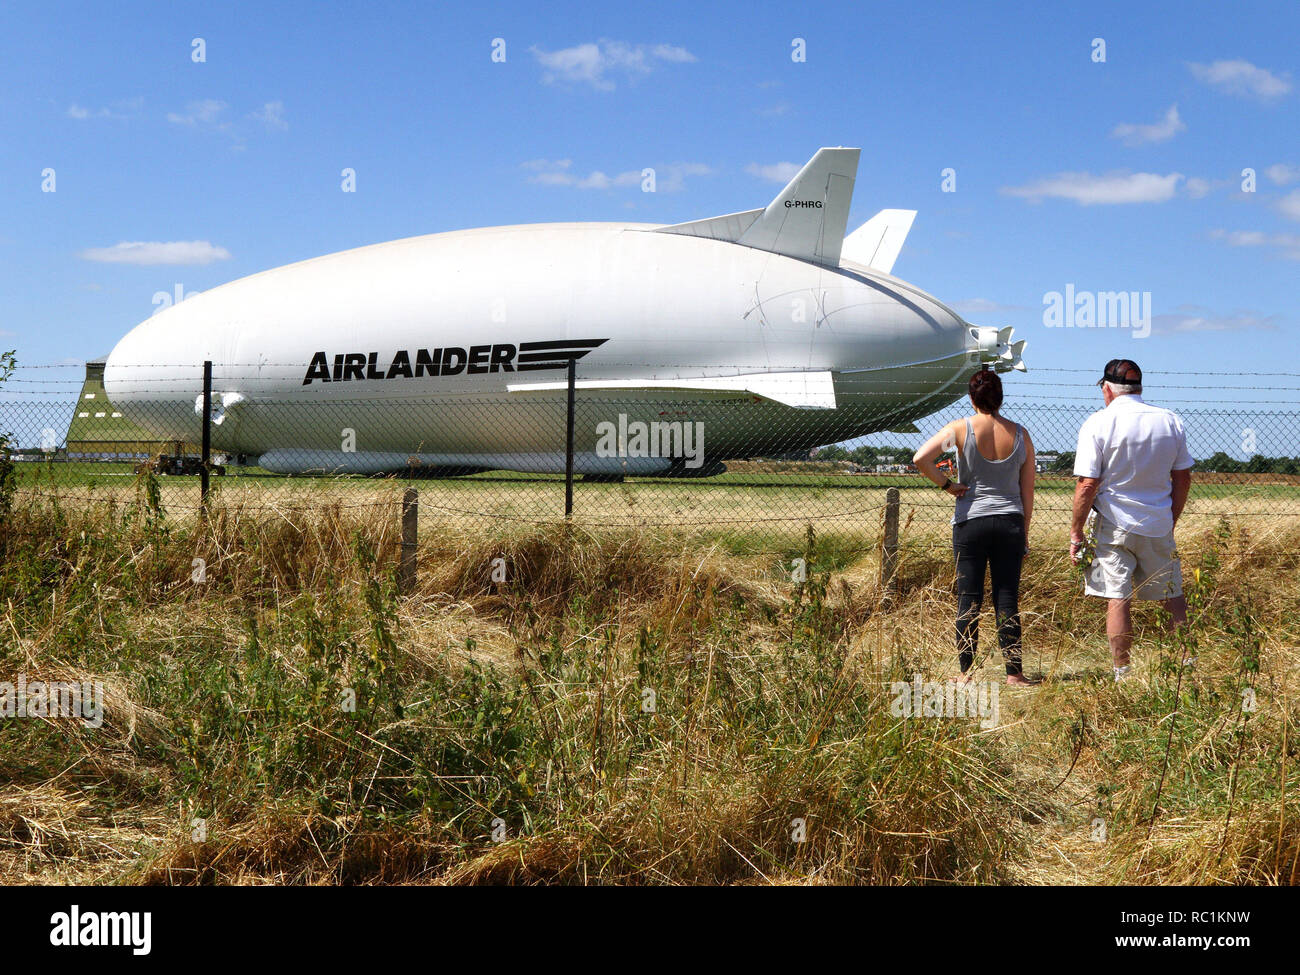 Cardington, UK. 7th Aug, 2016. View of the Airlander, the longest aircraft in the world.The Â£32m aircraft - nicknamed ''The Flying Bum'' was originally unveiled to the public at a naming ceremony by HRH The Duke of Kent in April 2016, but a few weeks later it crashed at the end of a test flight. At 92-metre long, the Airlander 10 is the longest aircraft in the world. The world's longest aircraft has been retired from service as developers prepare to start work on a new model. Credit: Keith Mayhew/SOPA Images/ZUMA Wire/Alamy Live News Stock Photo